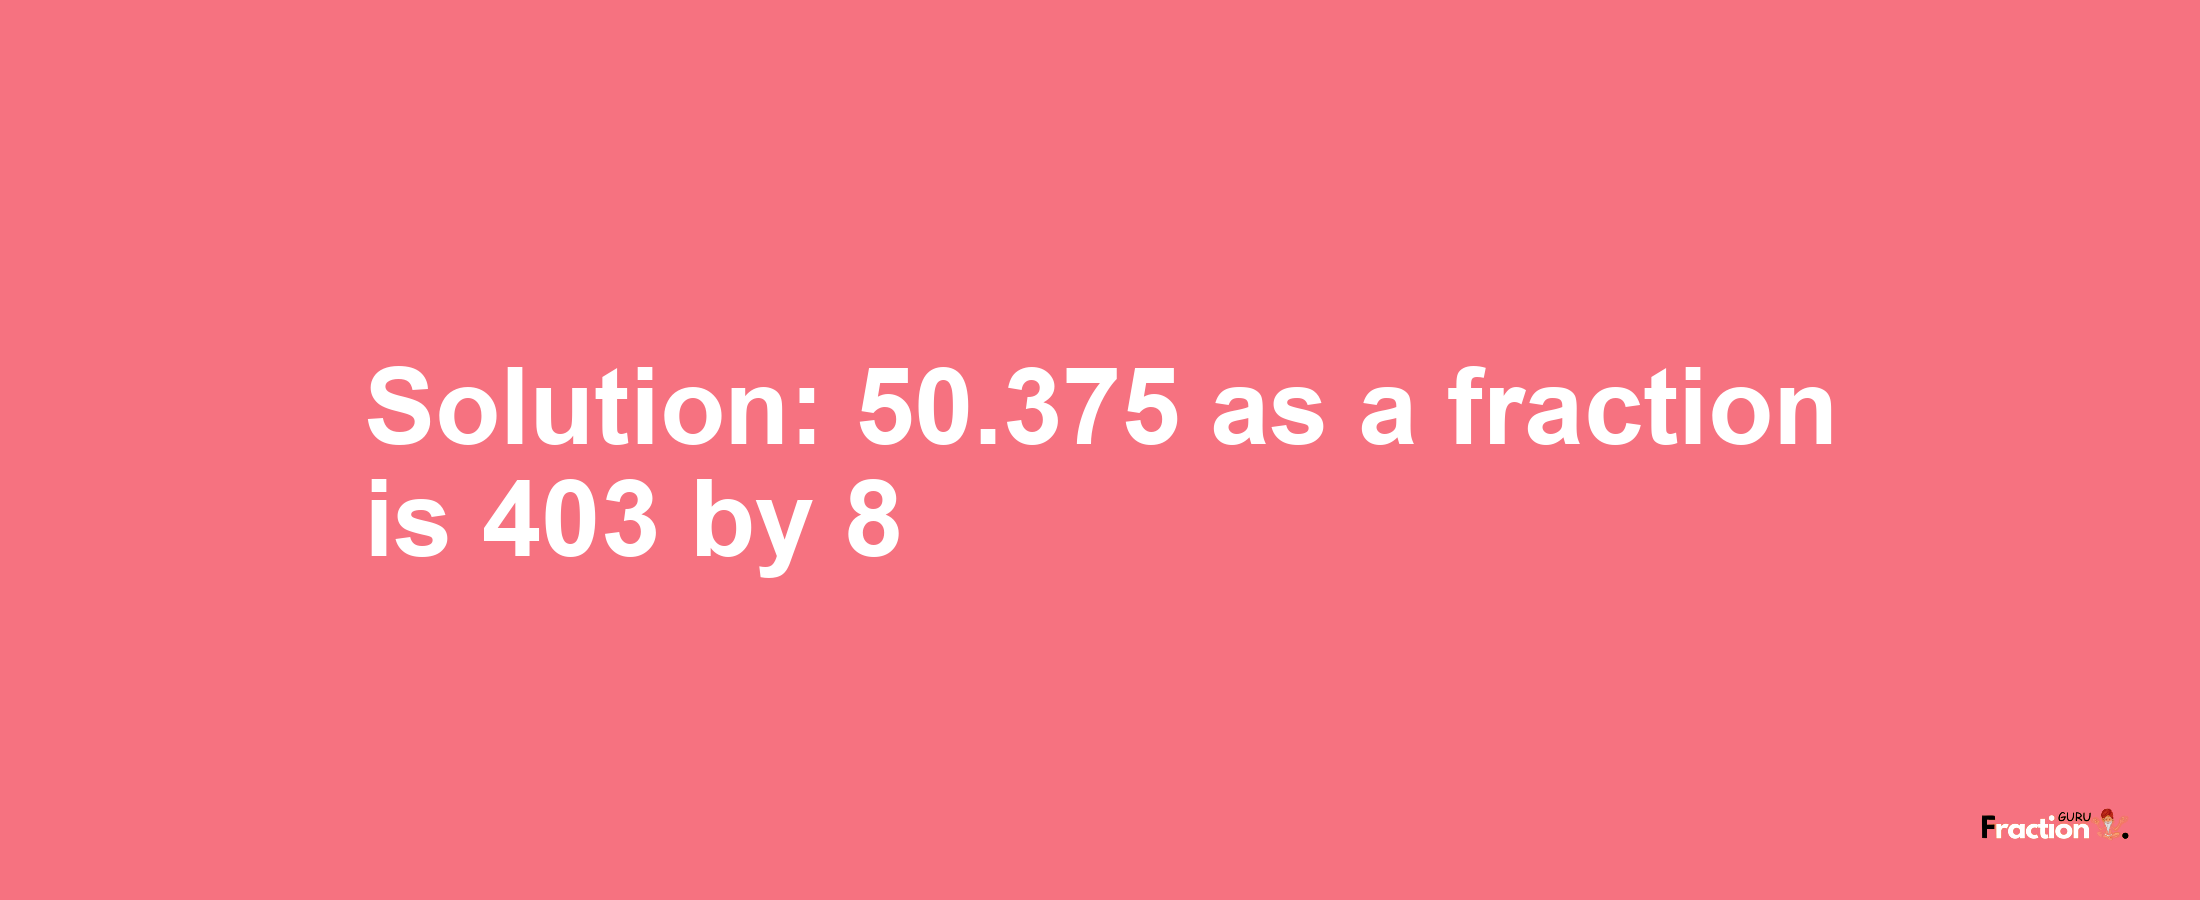 Solution:50.375 as a fraction is 403/8